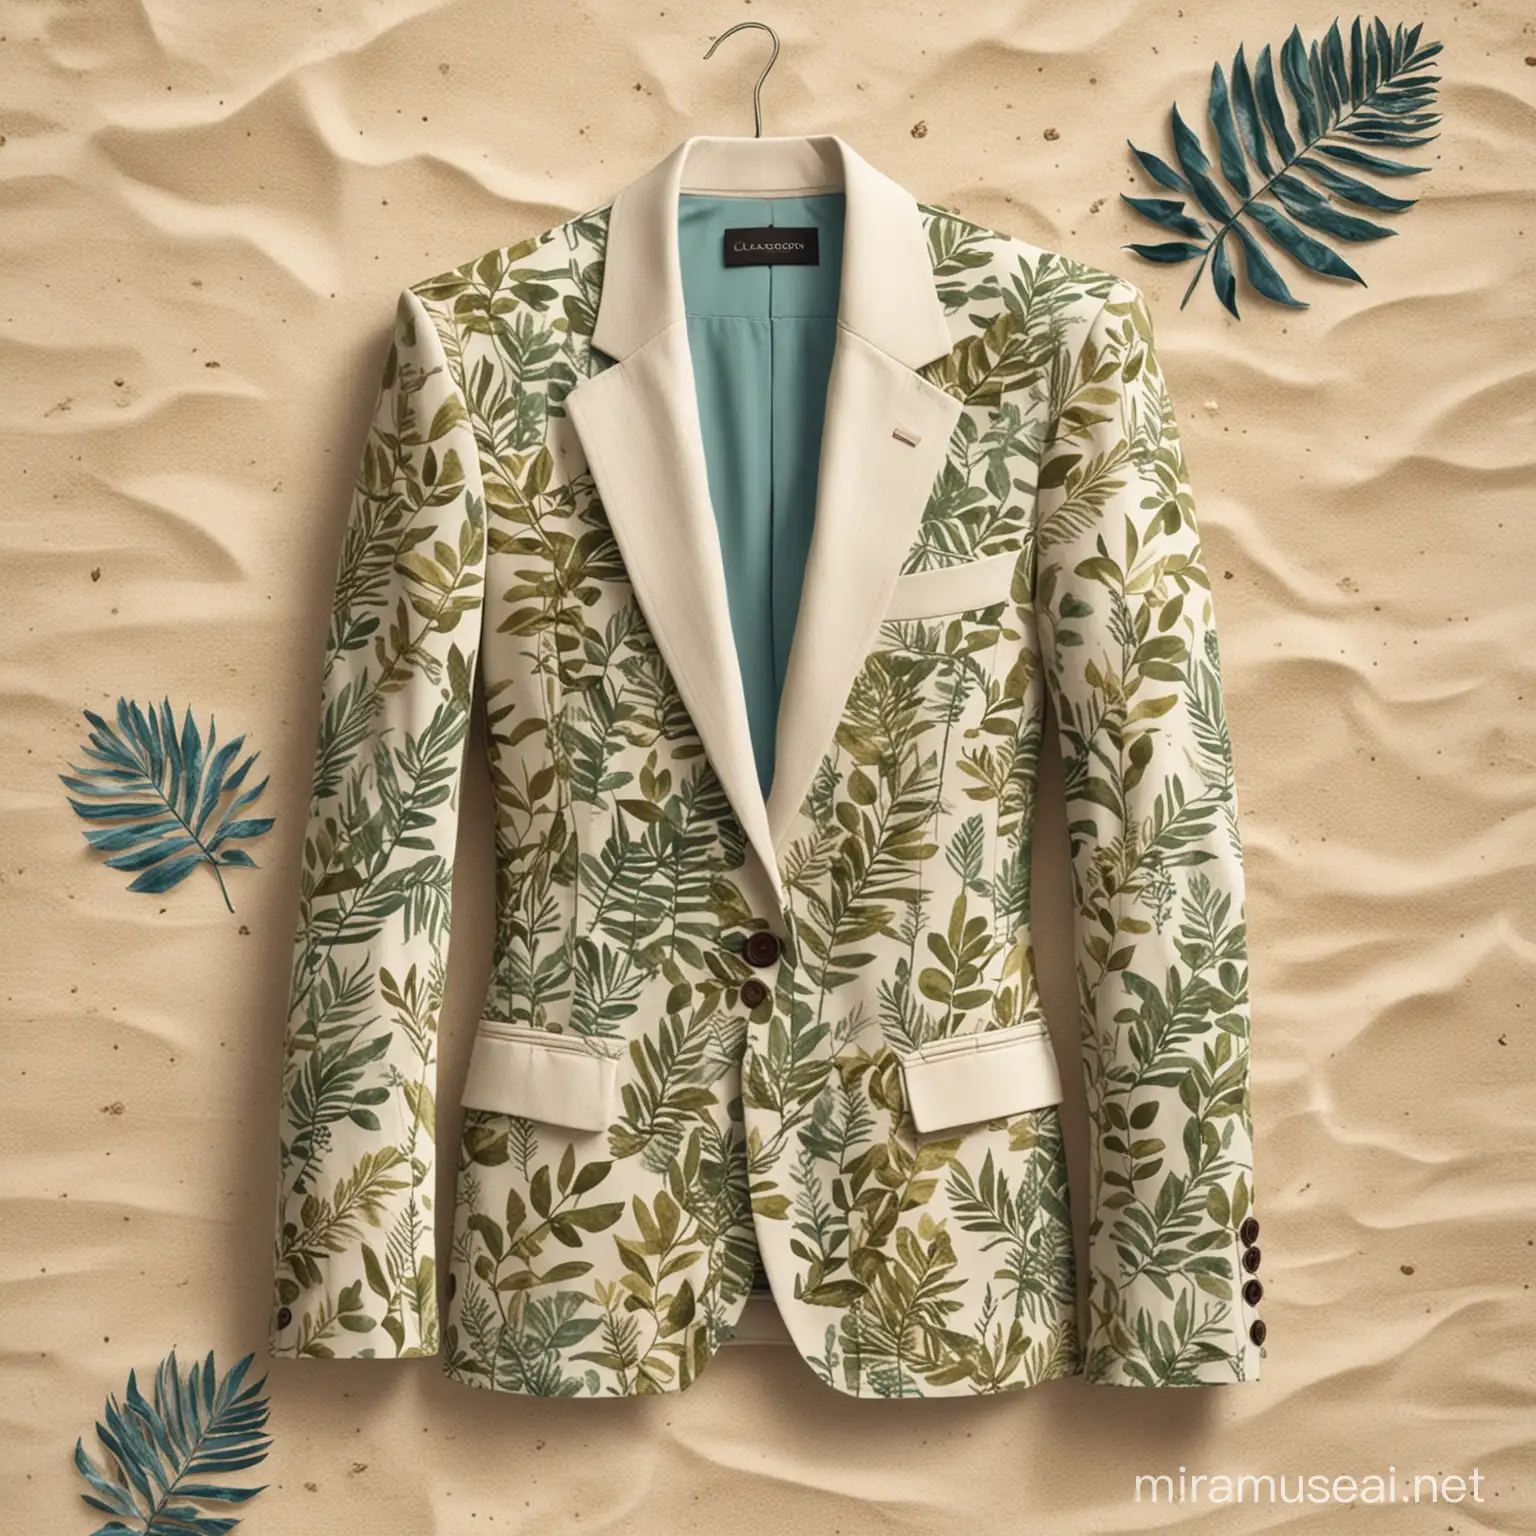 create a vector file of a blazer with simple summer textures which has beaches and tree leaves, etc